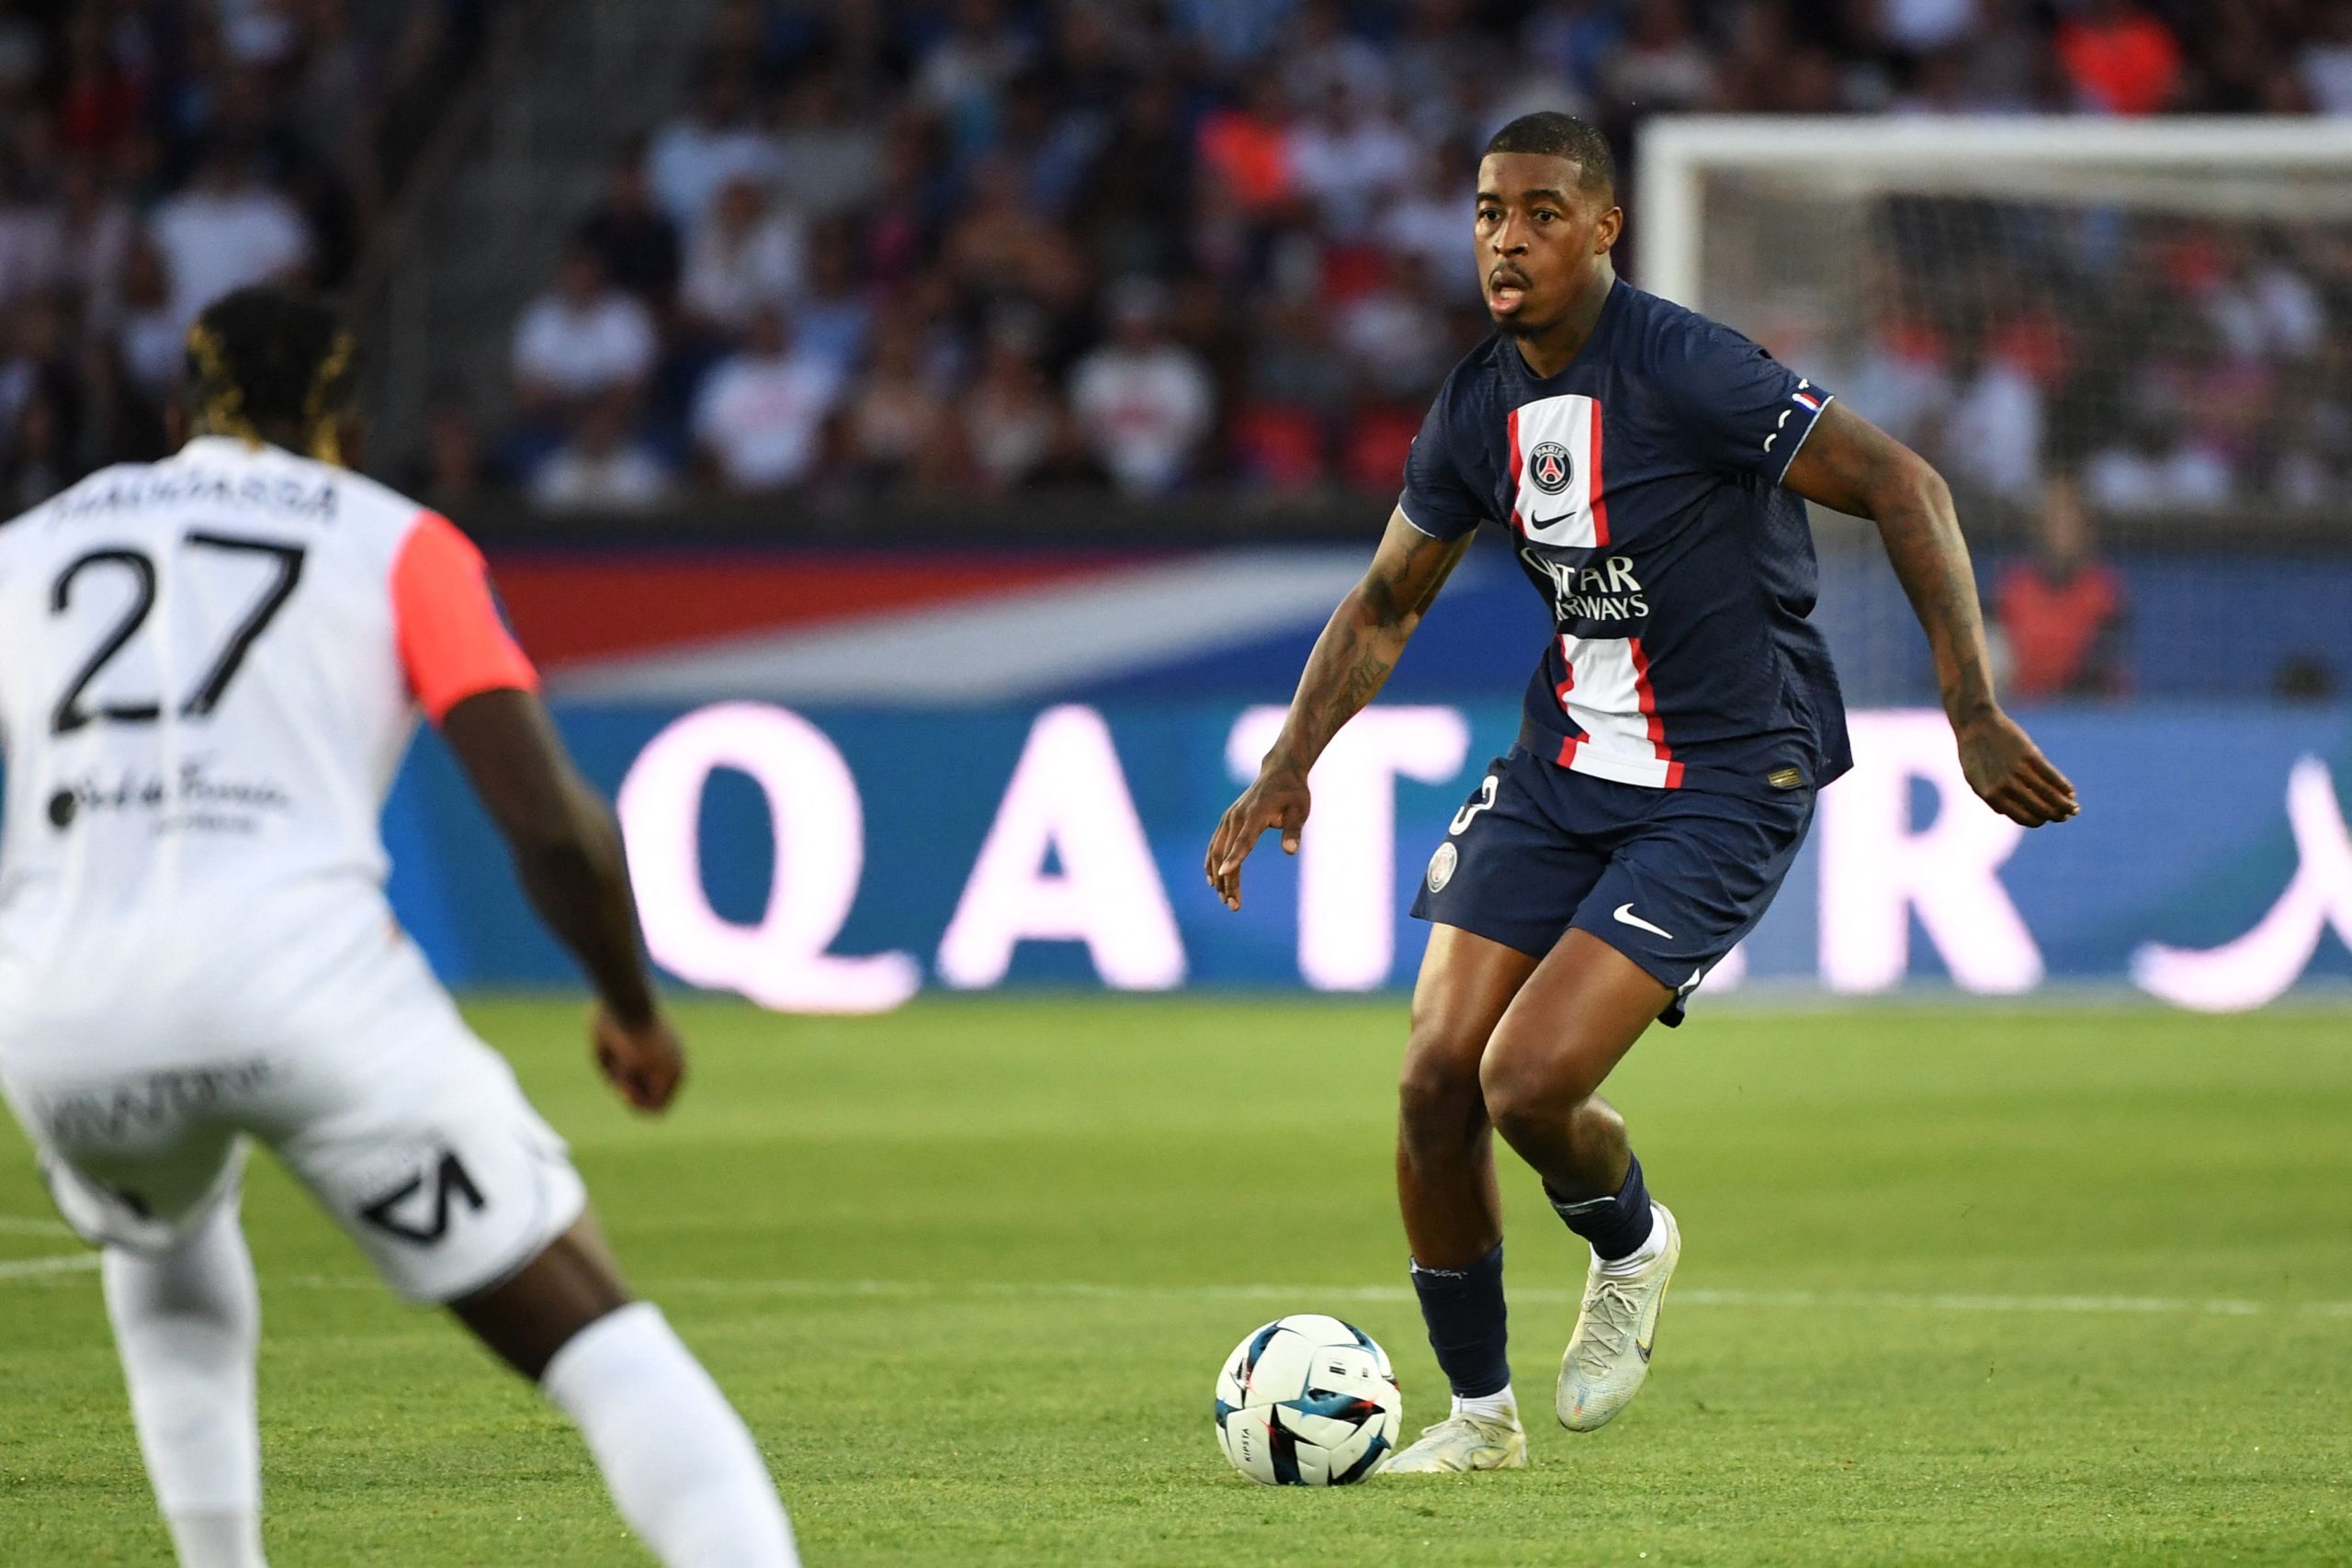 Presnel Kimpembe wanted by Chelsea?